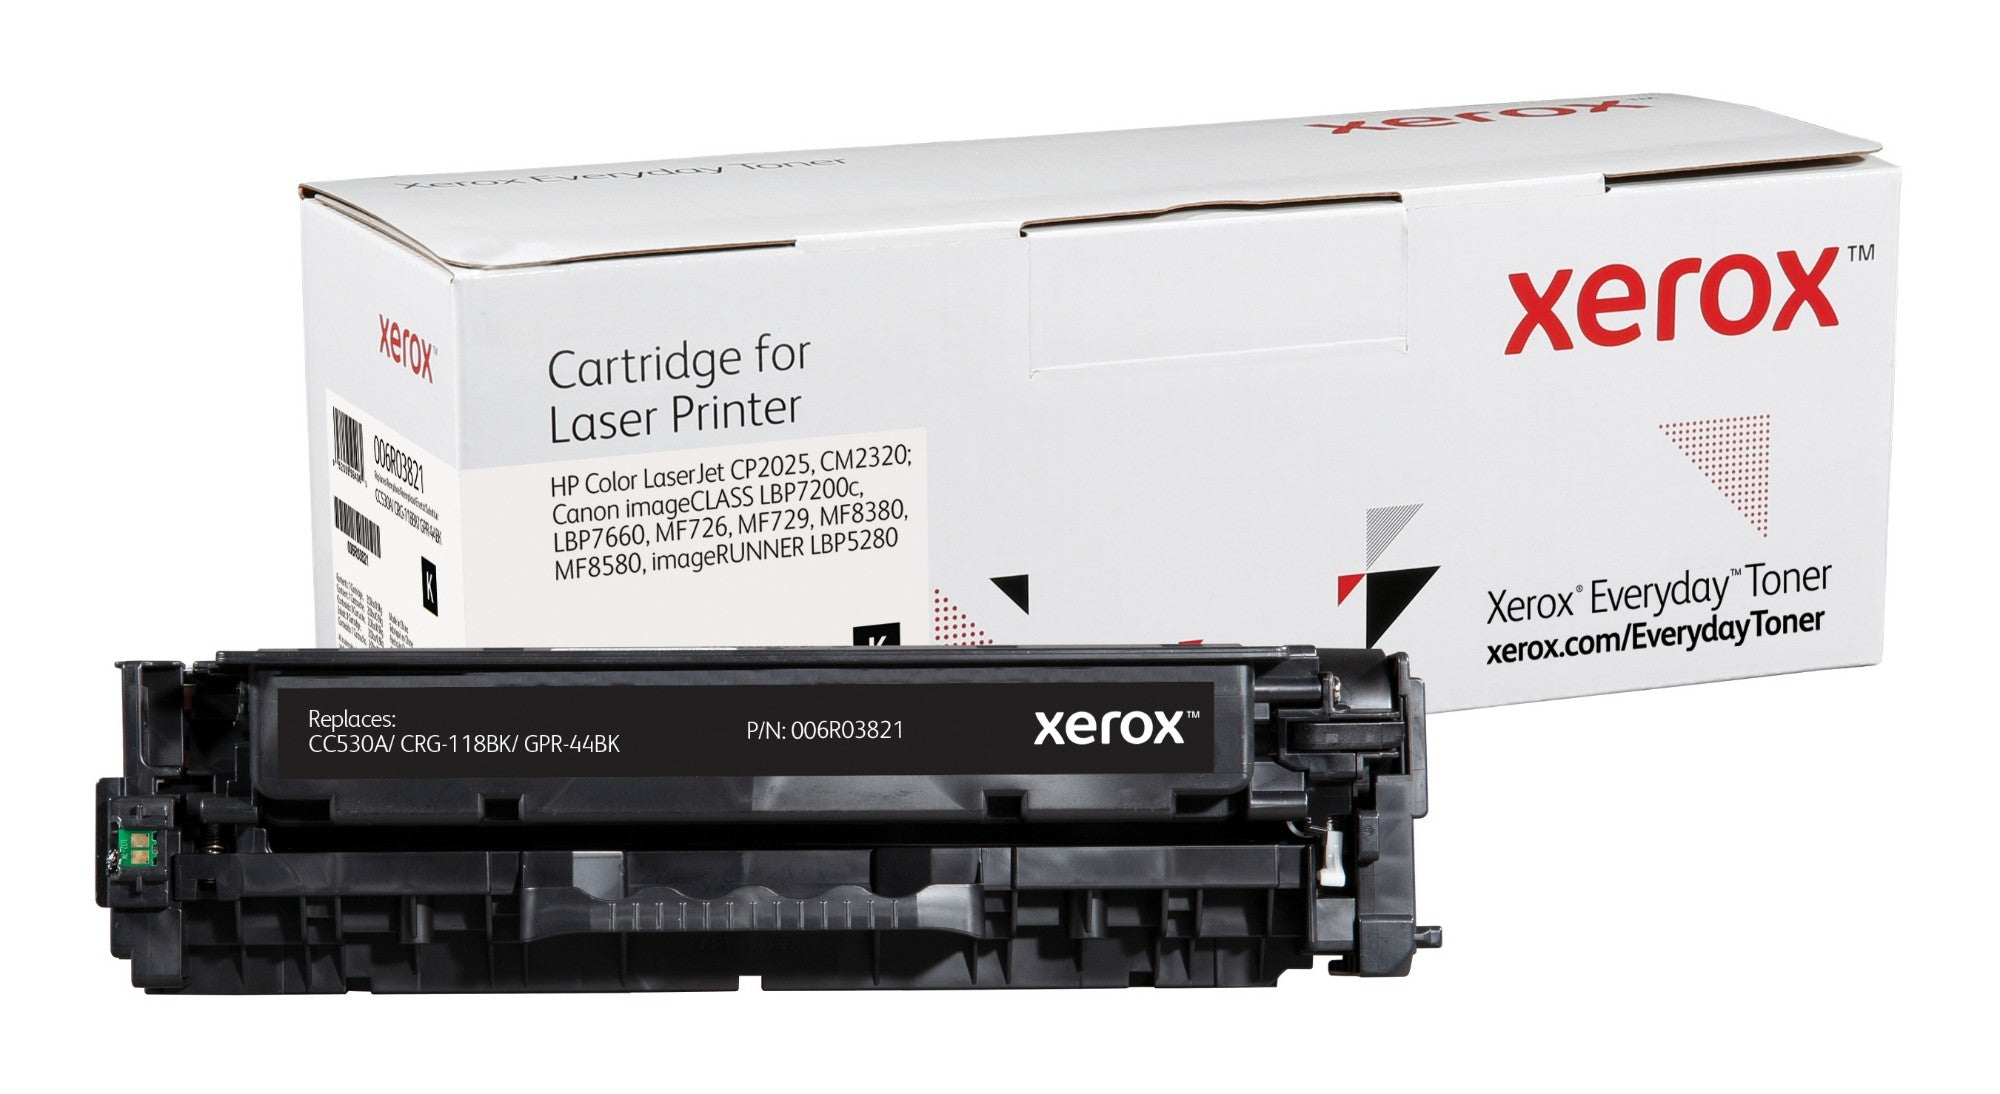 Xerox 006R03821 Toner cartridge black, 3.5K pages (replaces Canon 718BK HP 304A/CC530A) for Canon LBP-7200/HP CLJ CP 2025